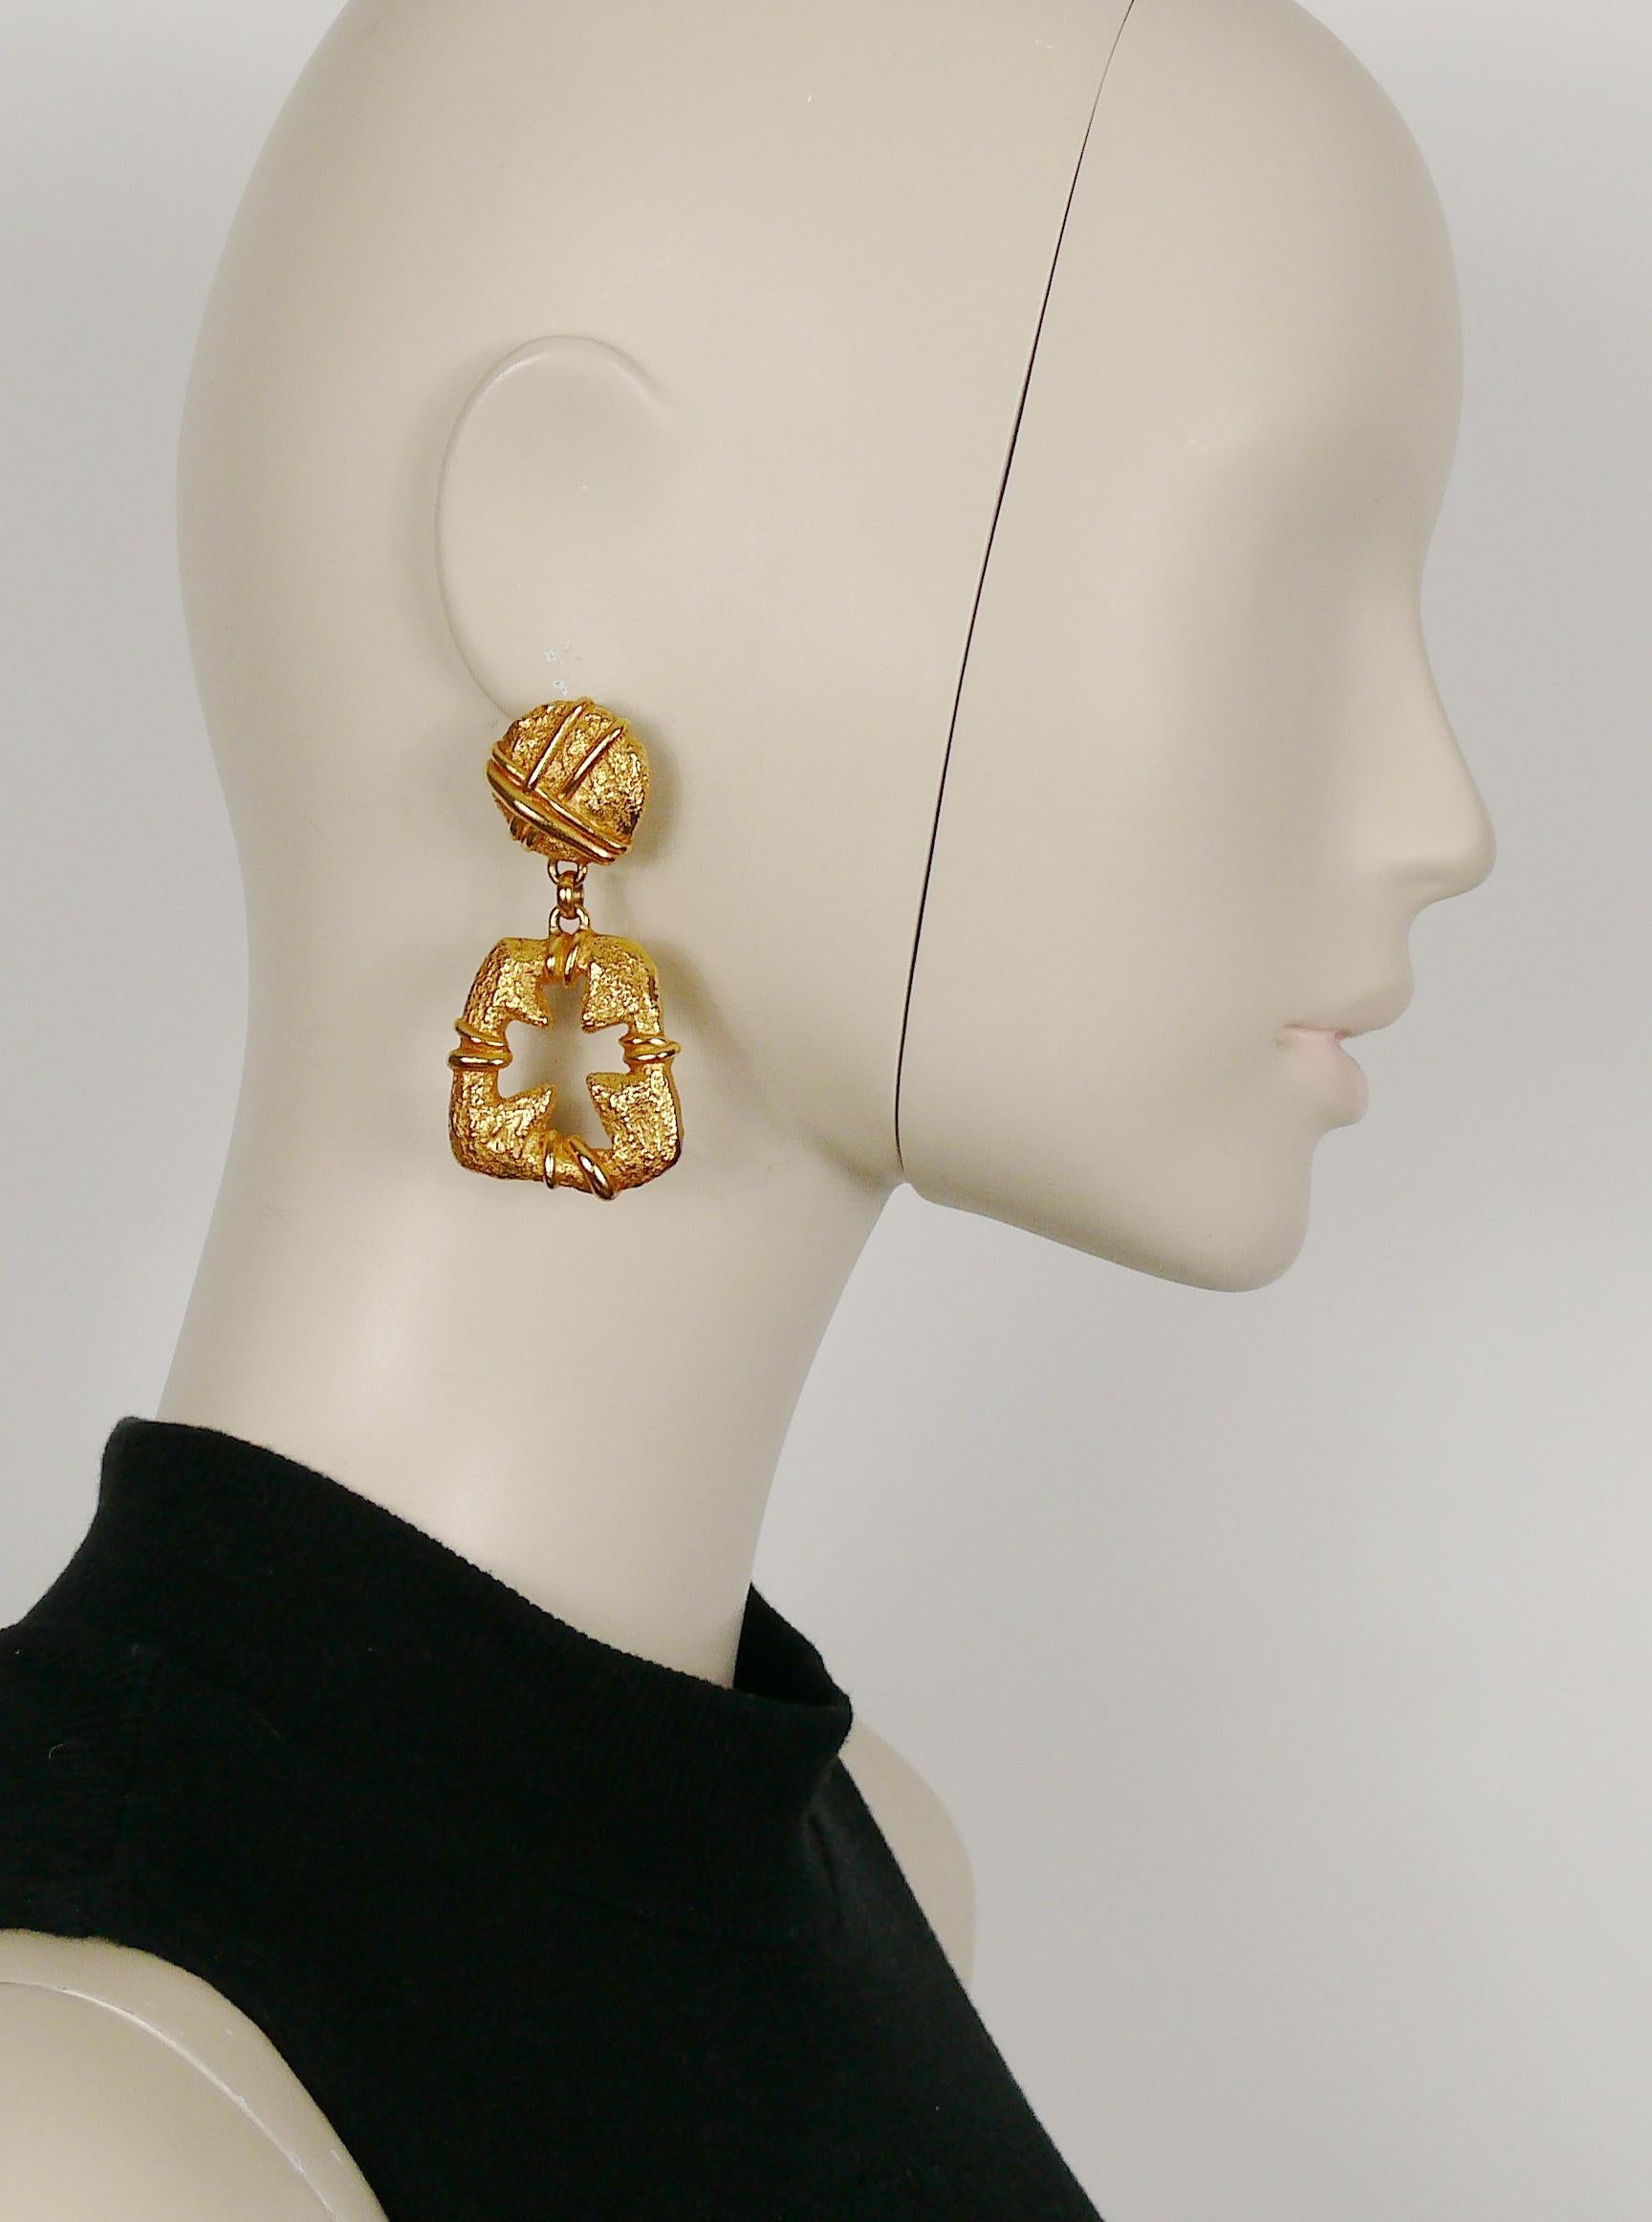 CHRISTIAN LACROIX vintage textured gold toned dangling earrings (clip-on) featuring a cut out cross.

Marked CHRISTIAN LACROIX E94 Made in France.

Indicative measurements : height approx. 6.5 cm (2.56 inches) / max. width approx 3 cm (1.18